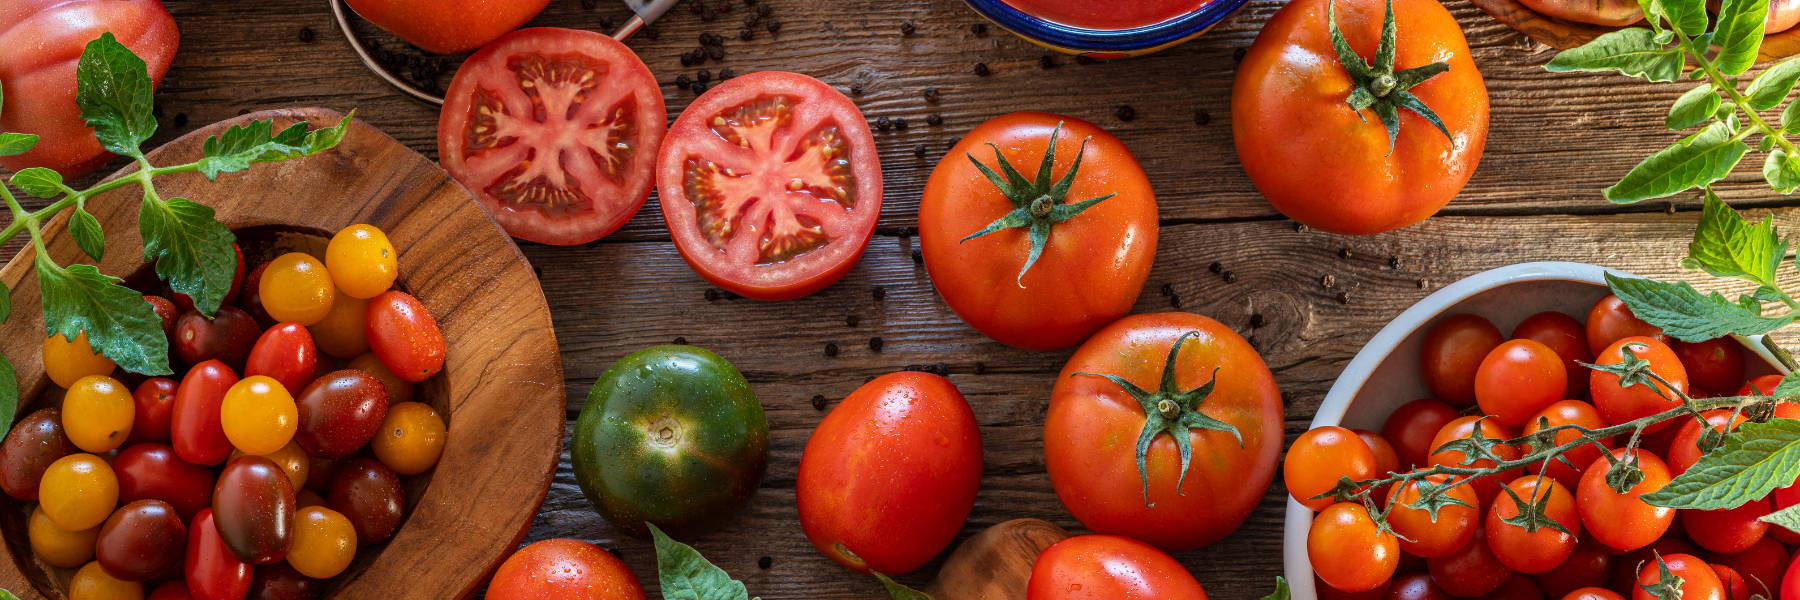 Wood table covered in various sizes and varieties of tomatoes